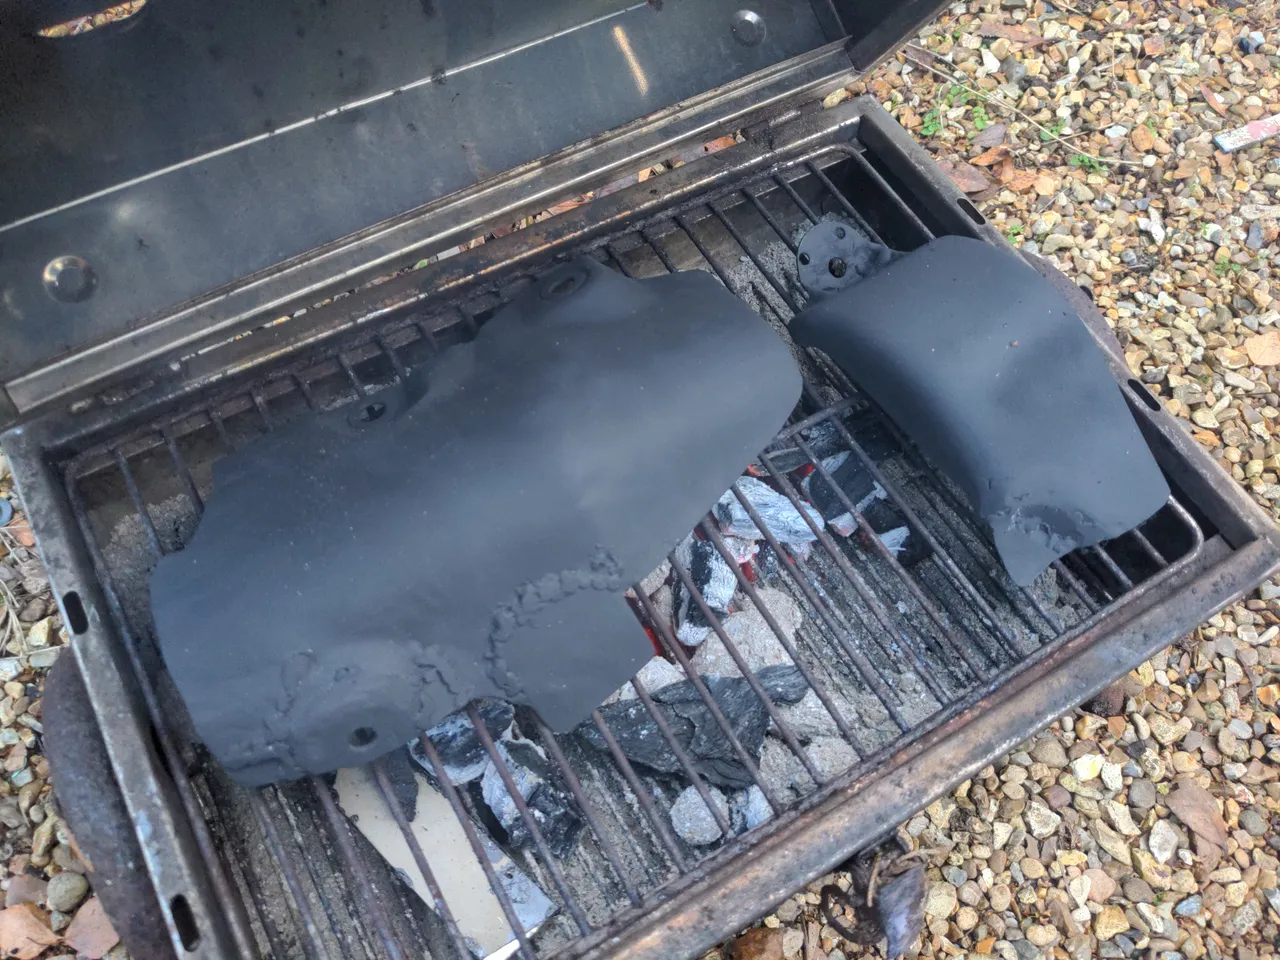 Both parts of my heatshield painted black and sitting on a hot BBQ.